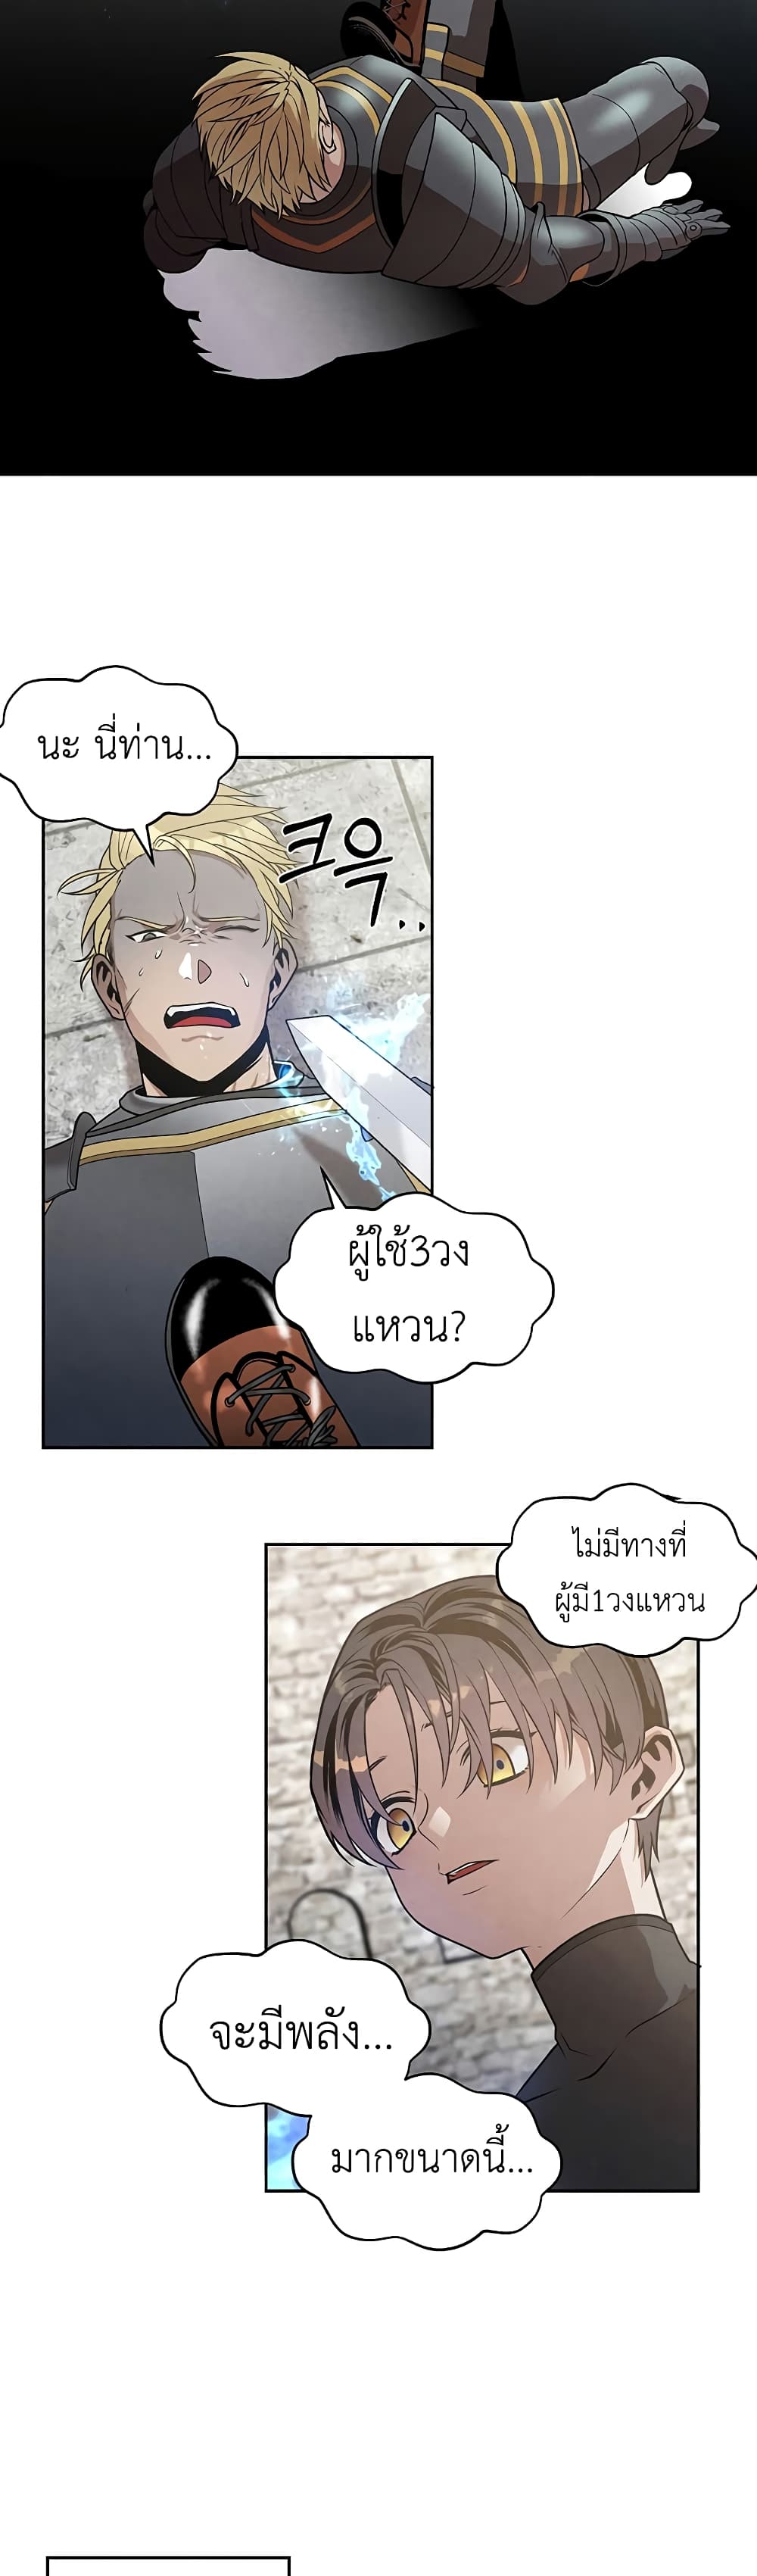 Legendary Youngest Son of the Marquis House 13 แปลไทย